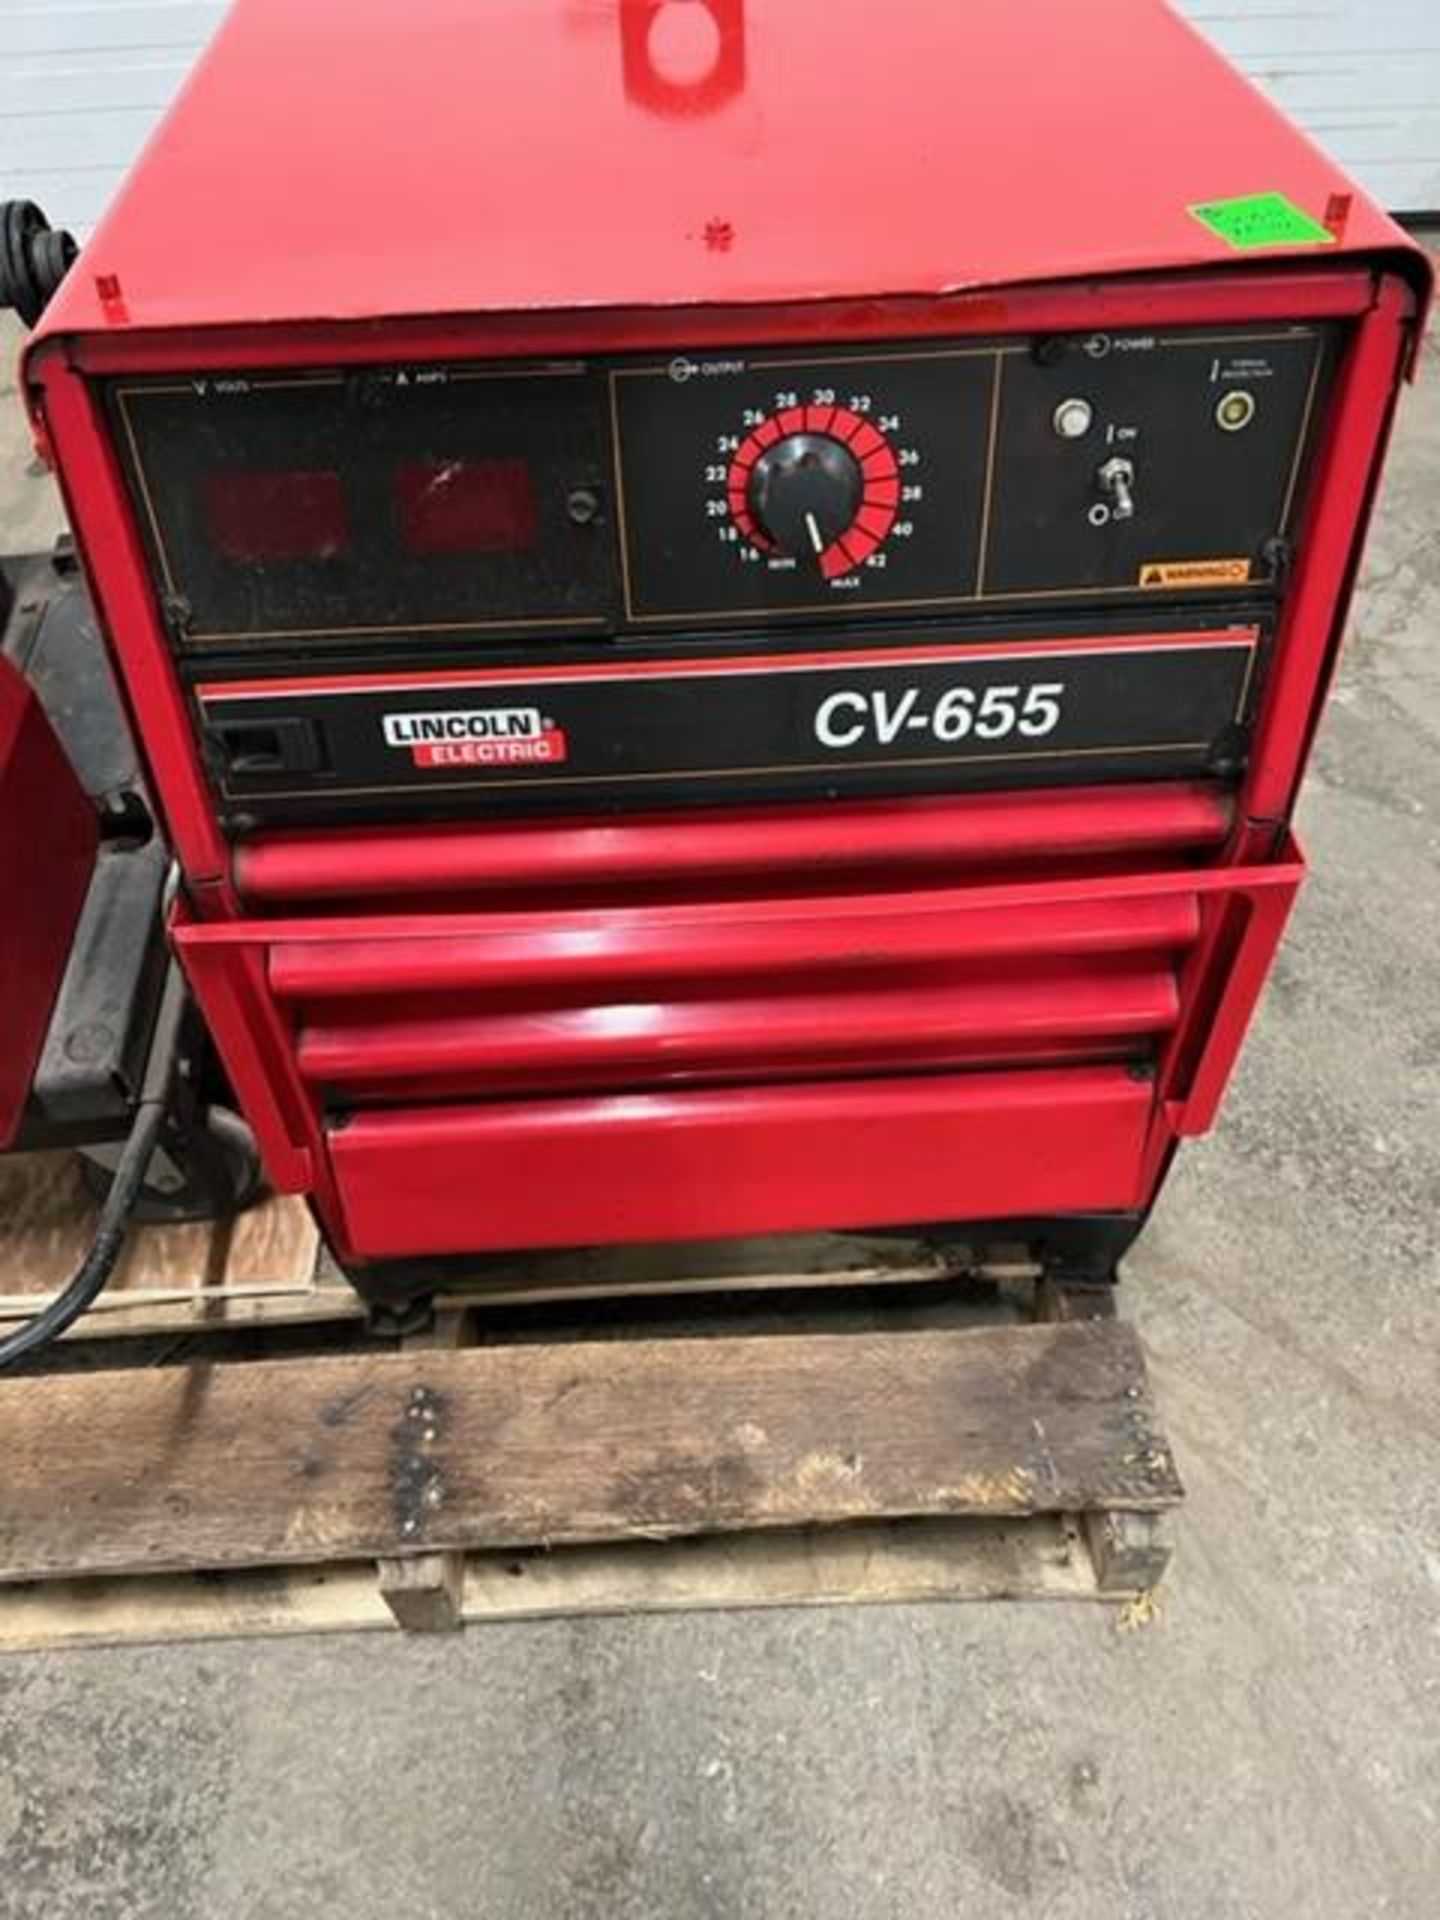 Lincoln Model CV-655 650 Amp Mig Welder with LF-74 Wire Feeder on Cart - Image 3 of 3